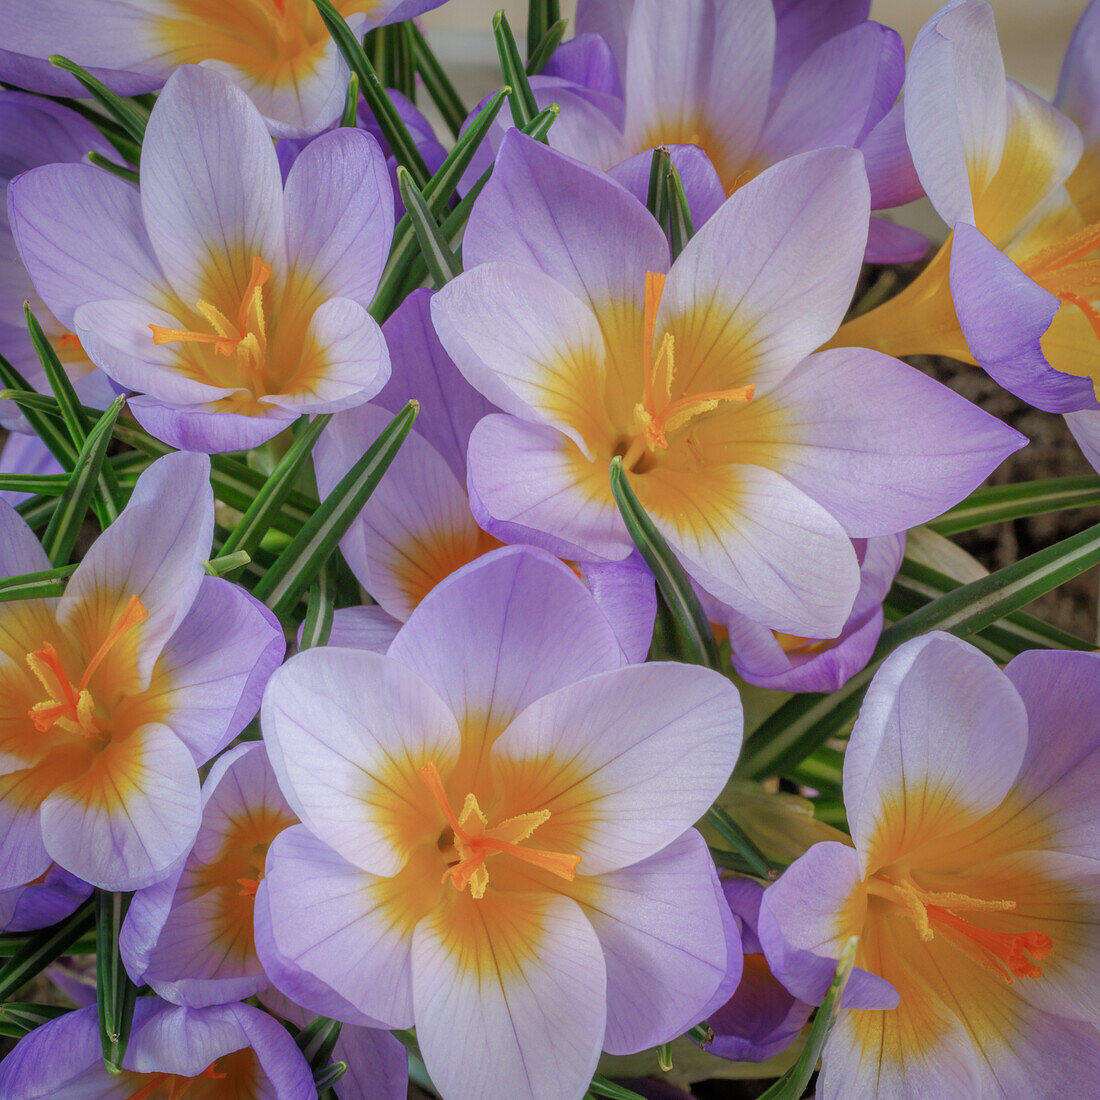 USA, Washington State, Seabeck. Crocus blossoms in spring.